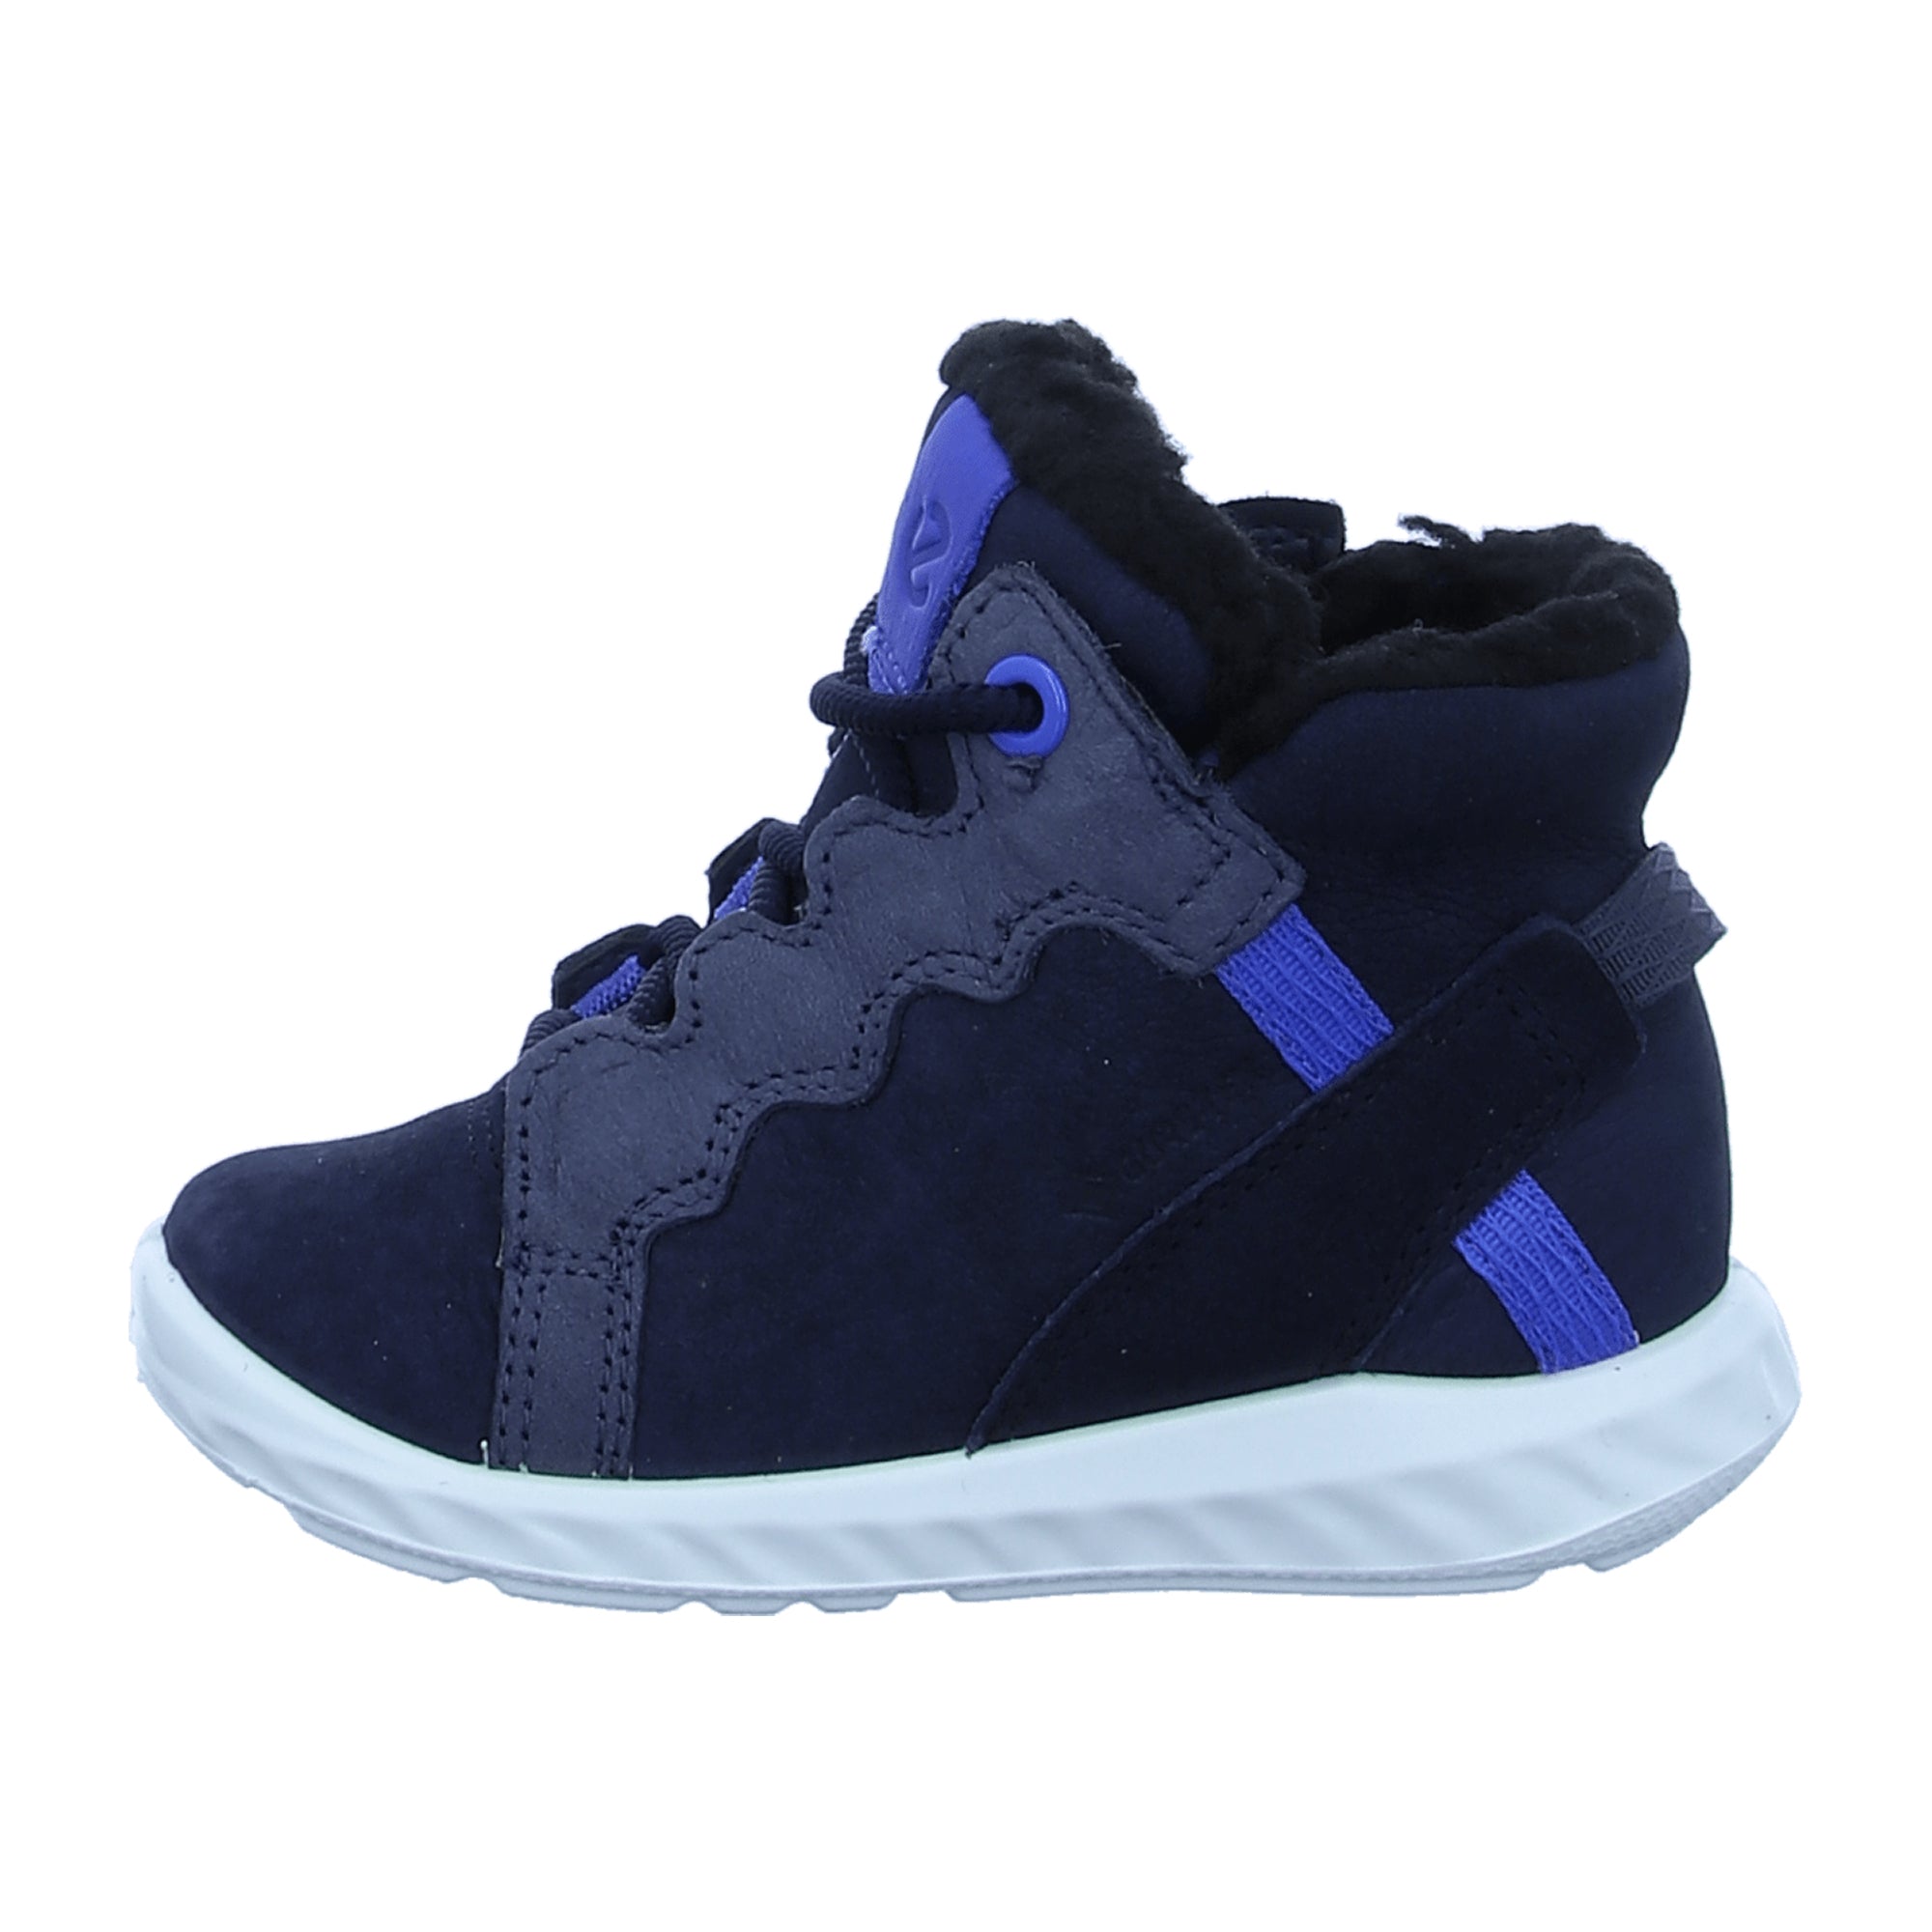 Ecco Kids Blue Sneakers for Children - Durable & Stylish